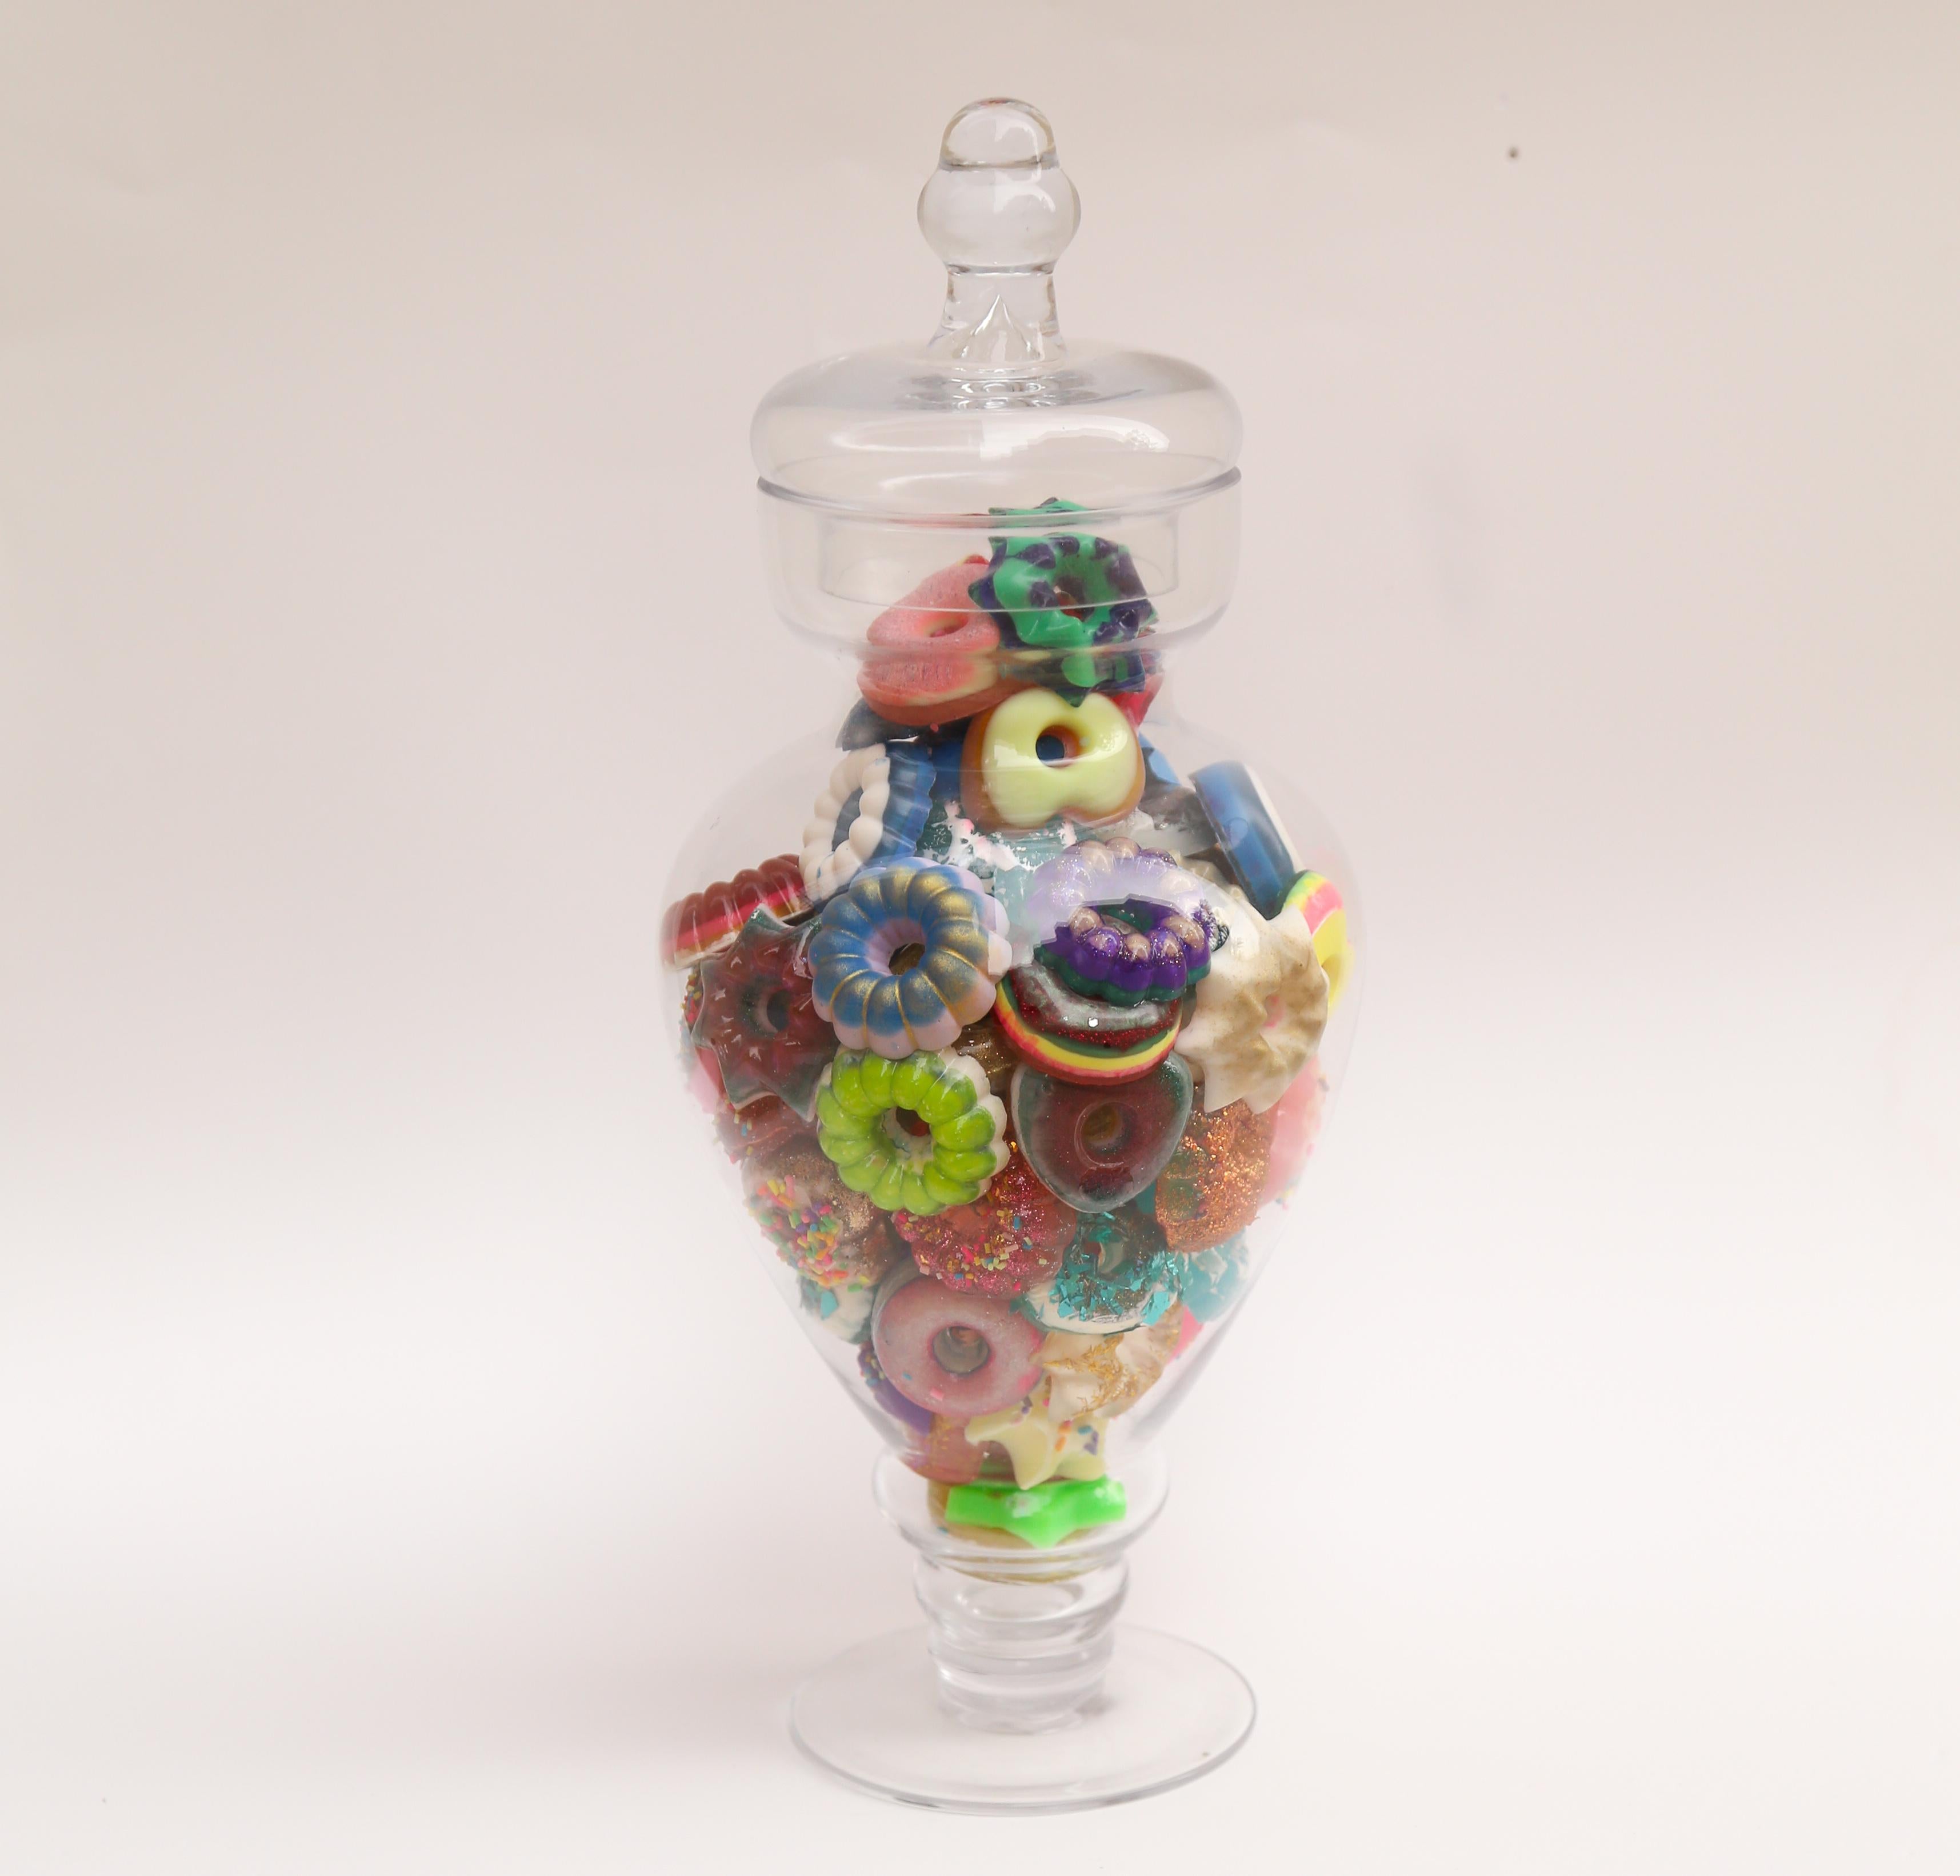 Betsy Enzensberger Still-Life Sculpture - Donut Jar - Handmade Mini Resin Donuts in Glass Candy Jar / colorful 